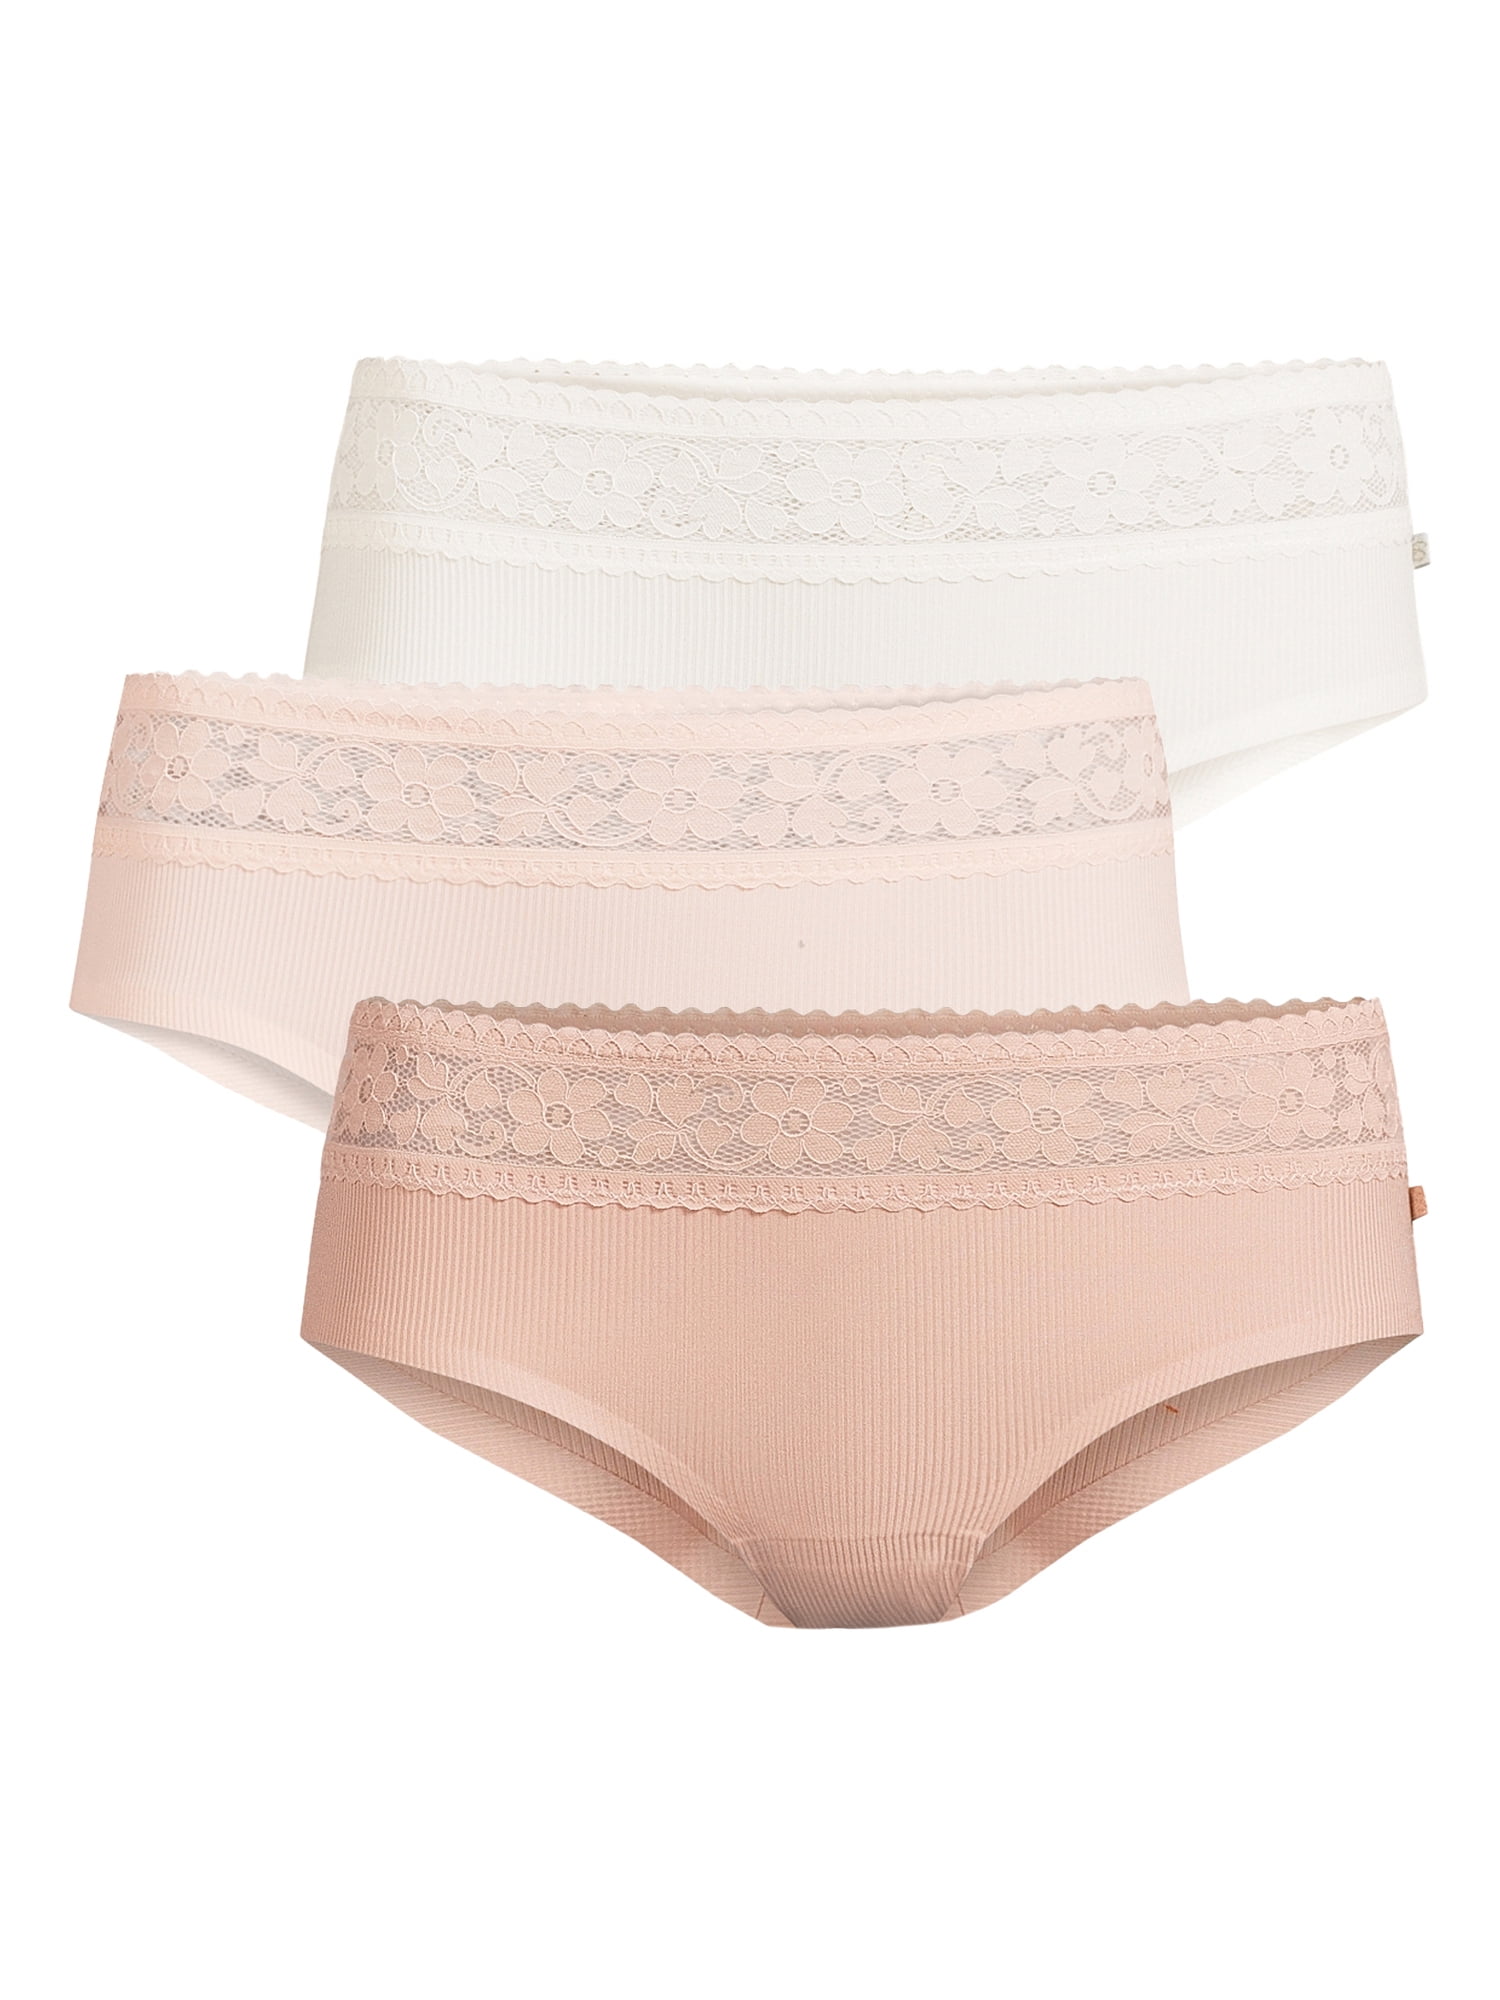 Jessica Simpson Women's Micro Bonded Hipster Panties, 5-Pack